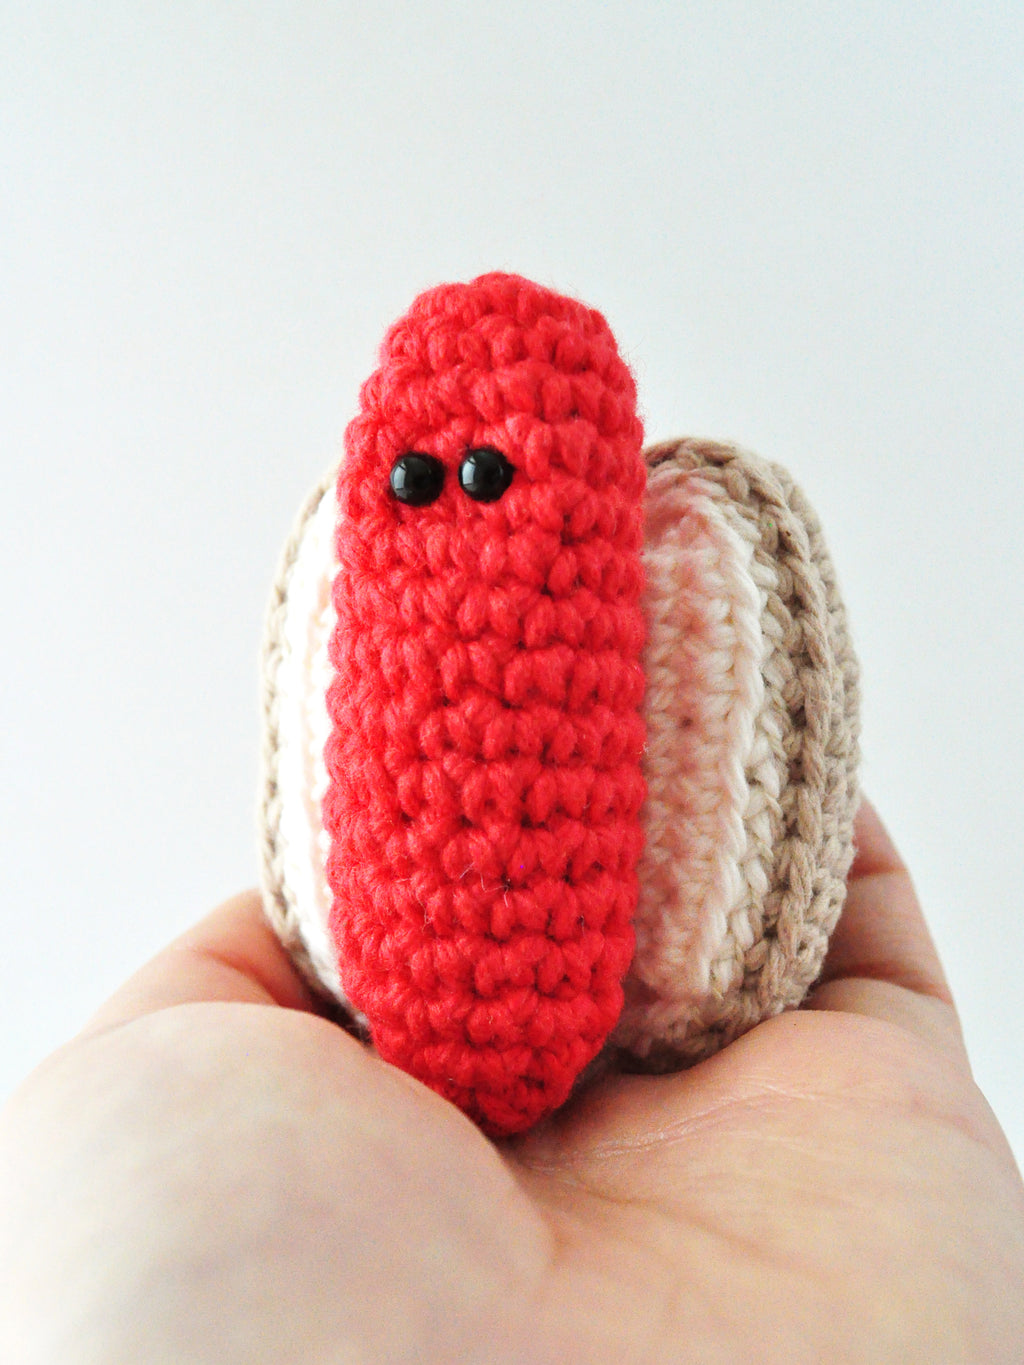 Amigurumi hot dog pattern with step by step photos